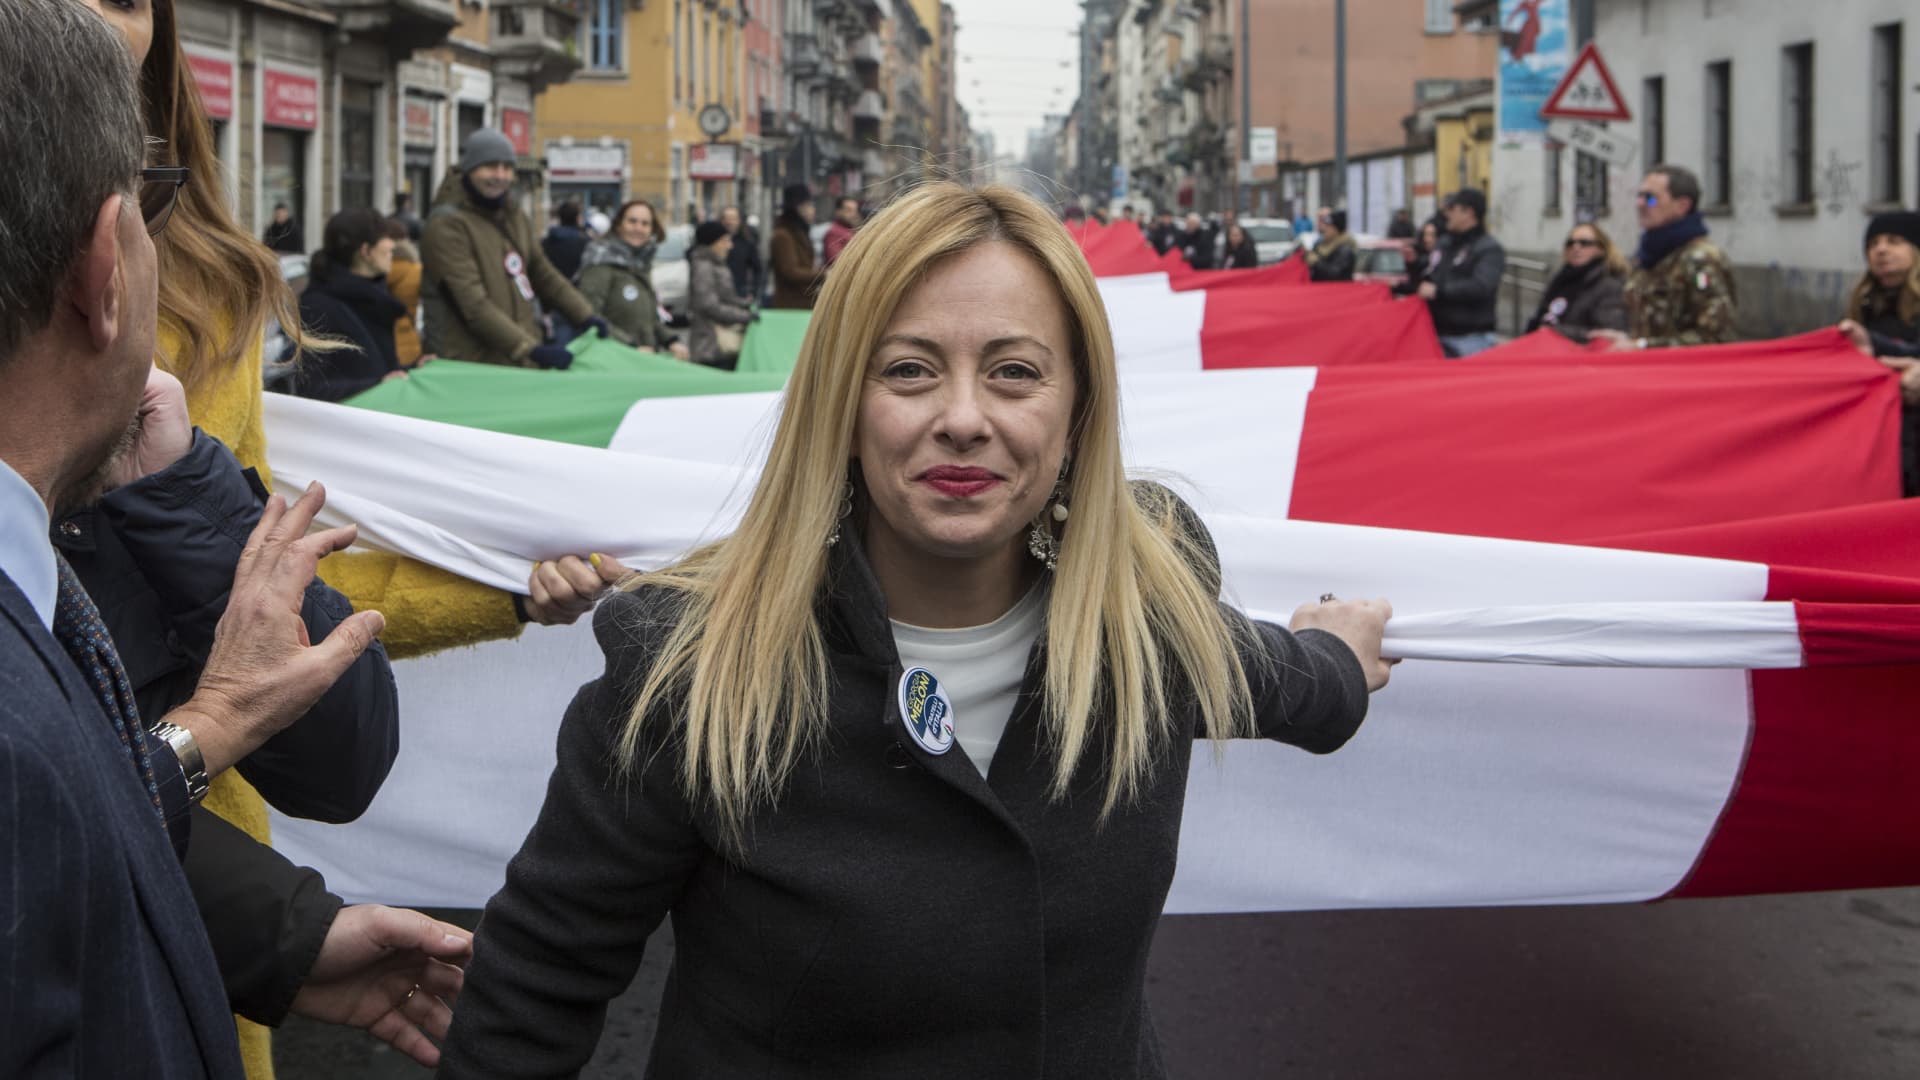 Italy turns to the right with FDI’s Georgia Meloni